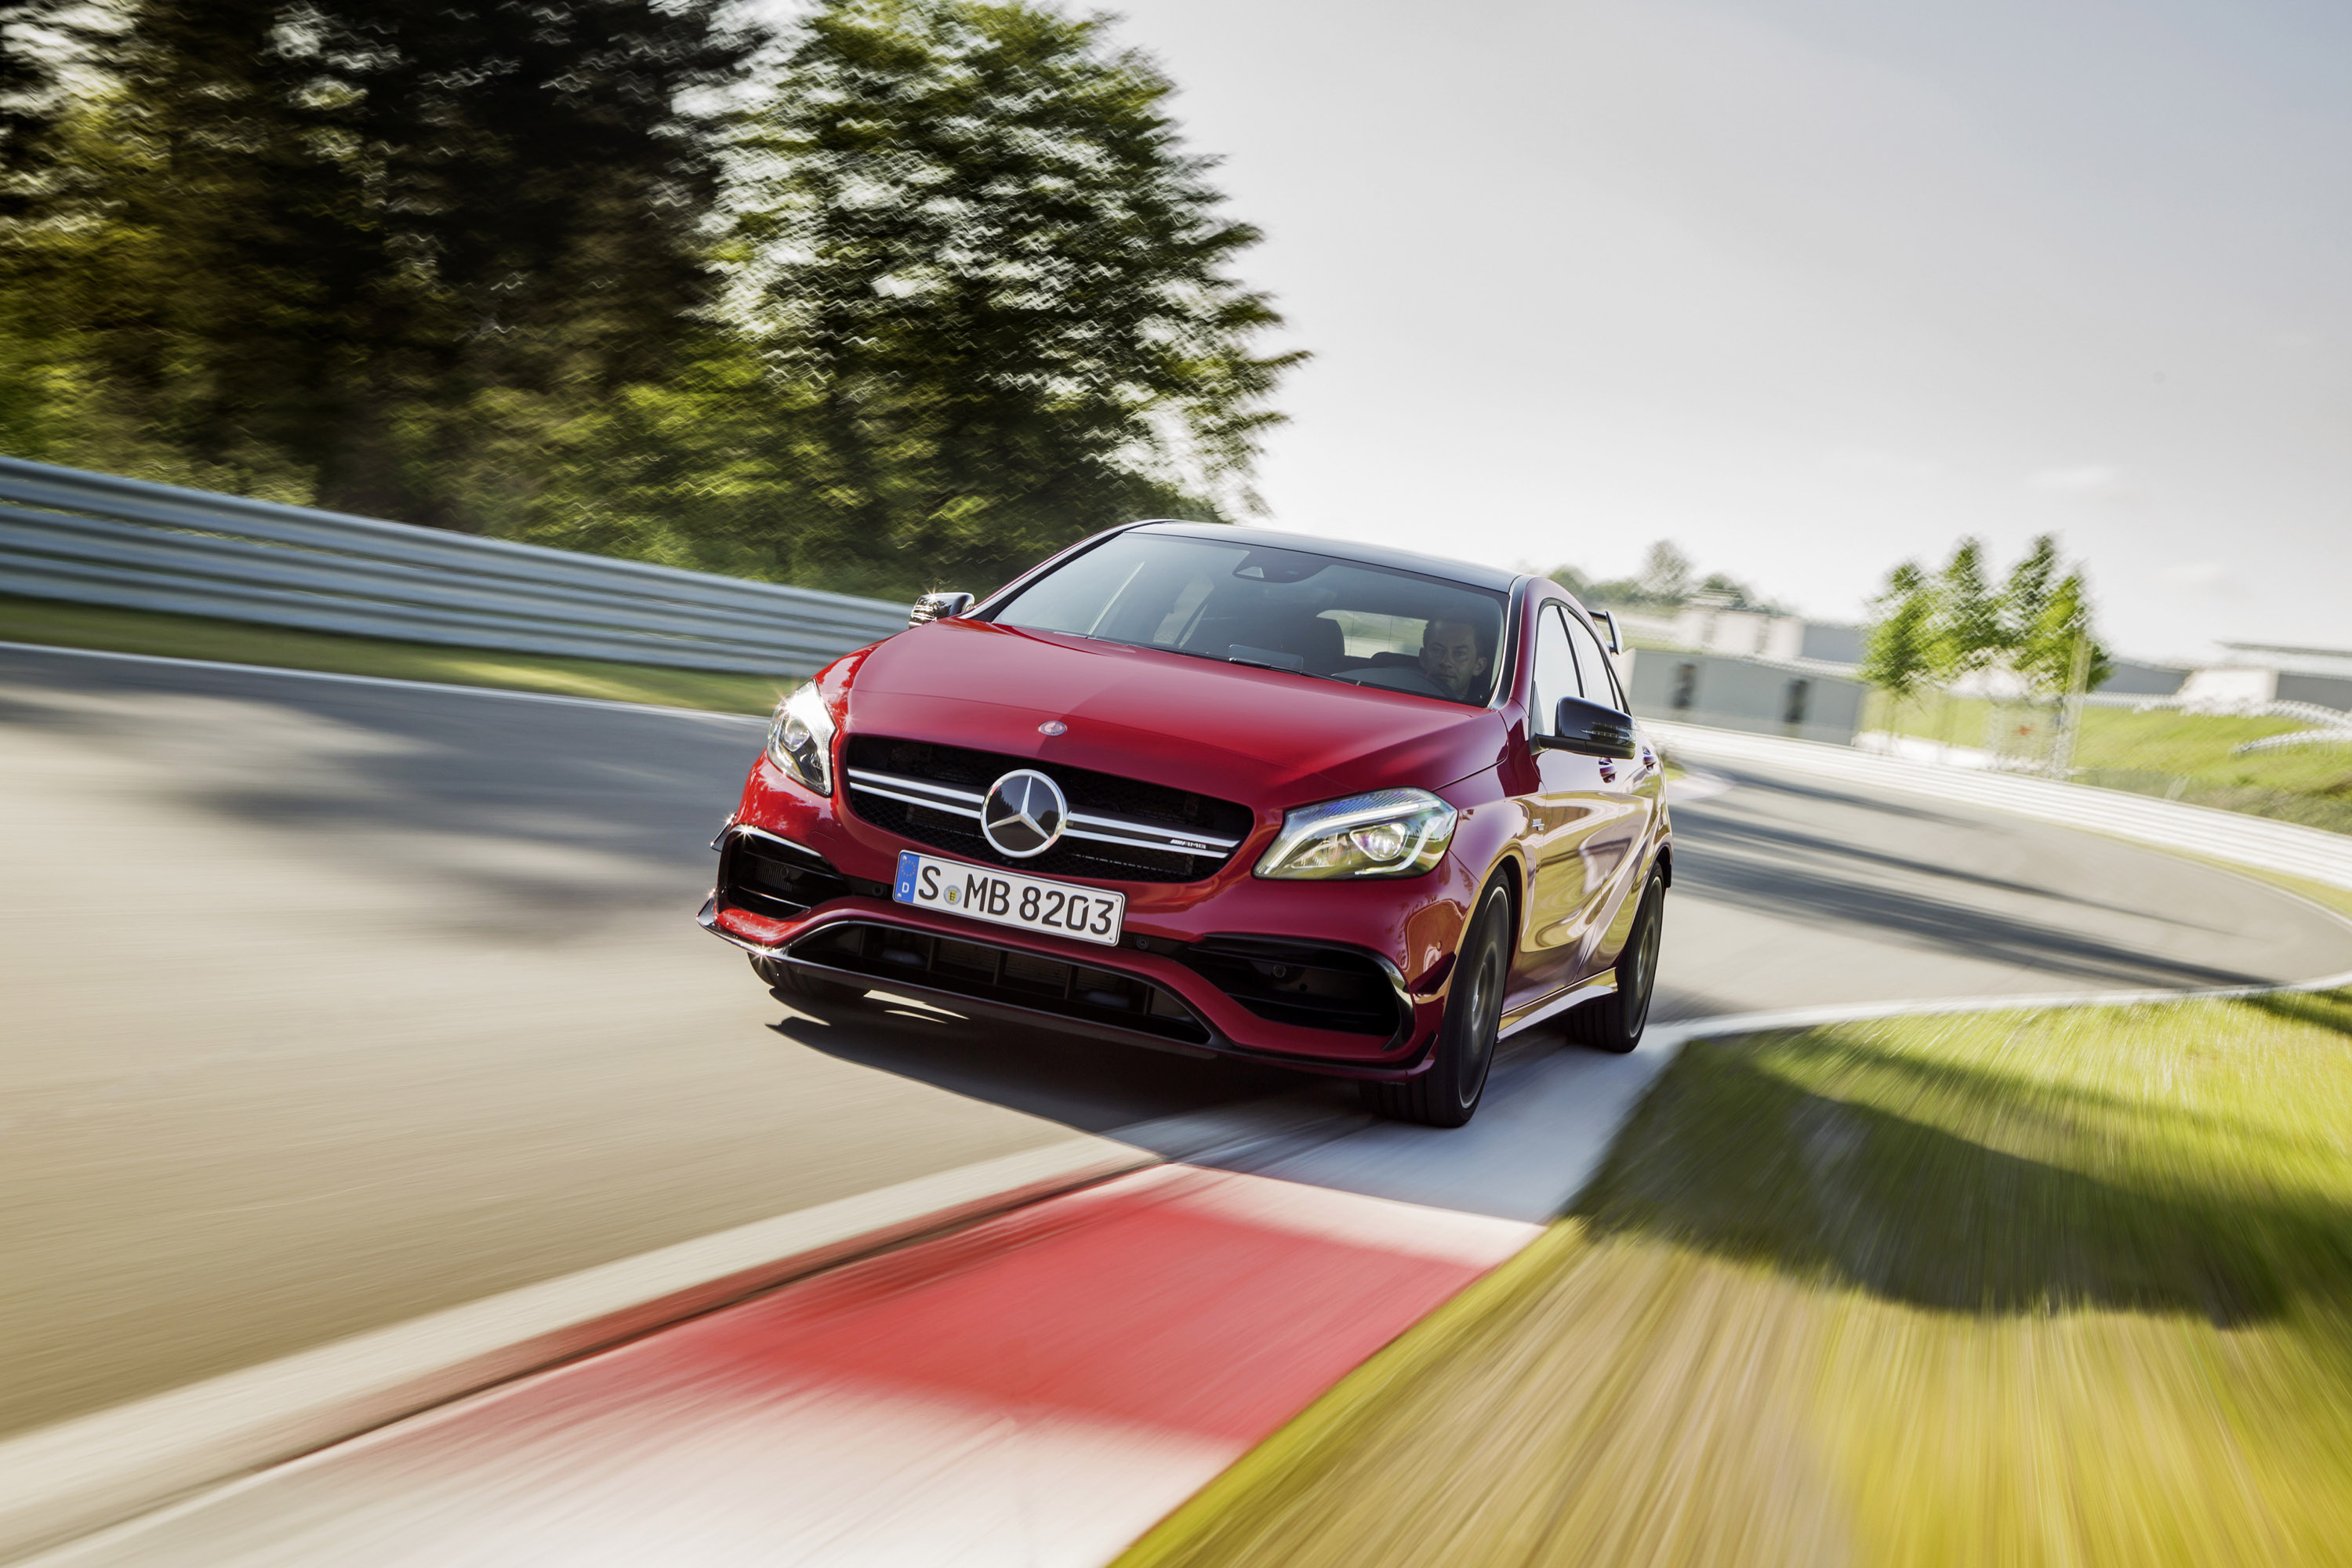 Mercedes-Benz A-Class, Sophisticated and elegant, Cutting-edge technology, Sporty performance, 3000x2000 HD Desktop